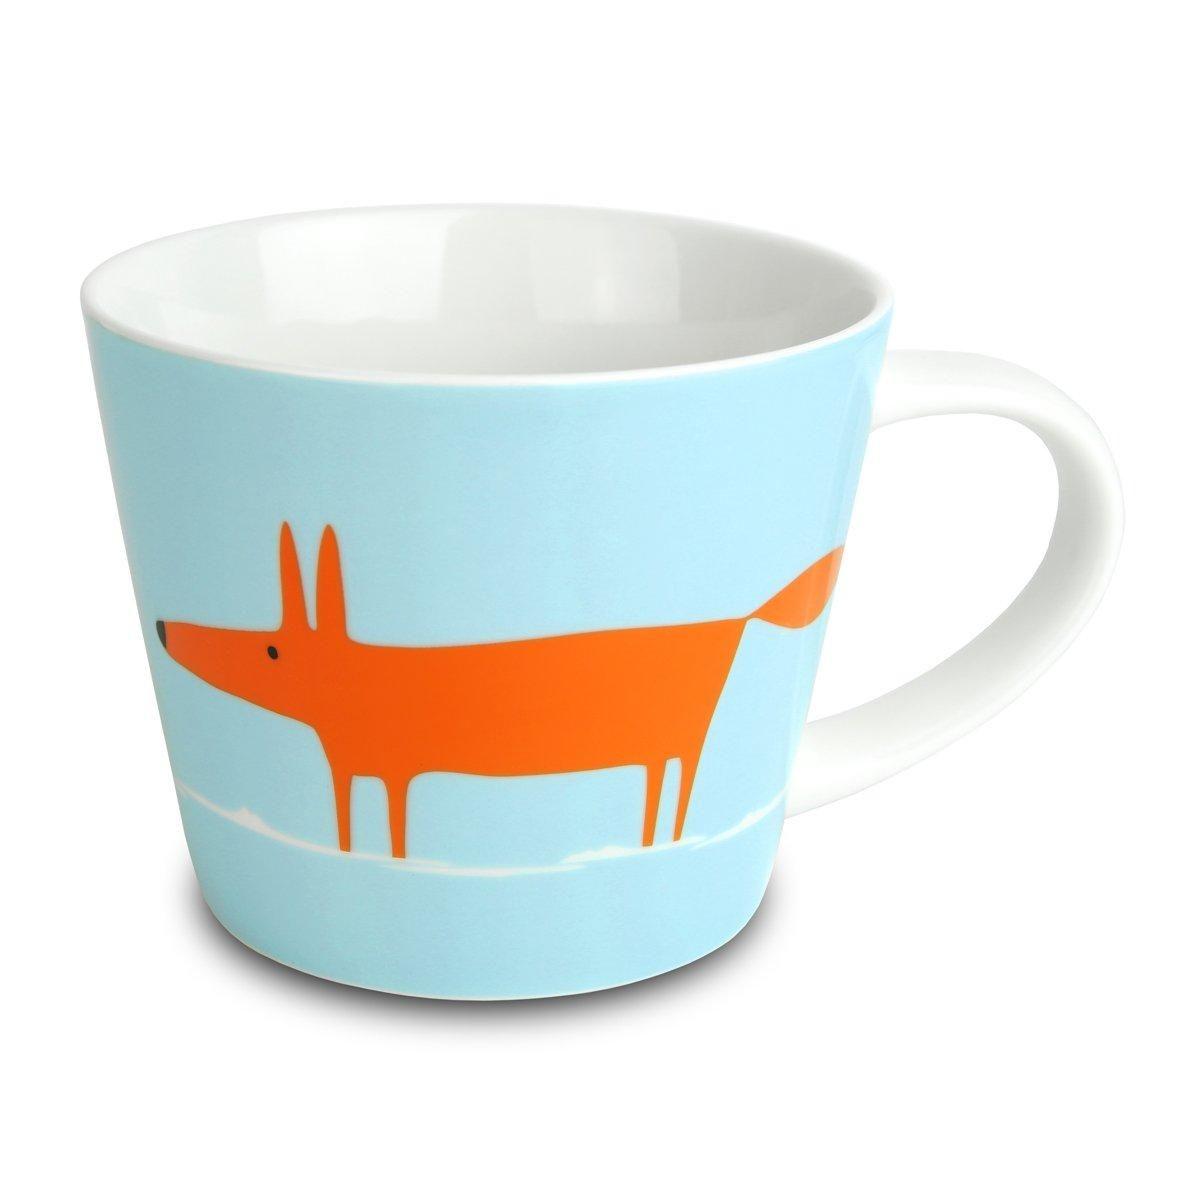  Mugs And Cups SC-0188 